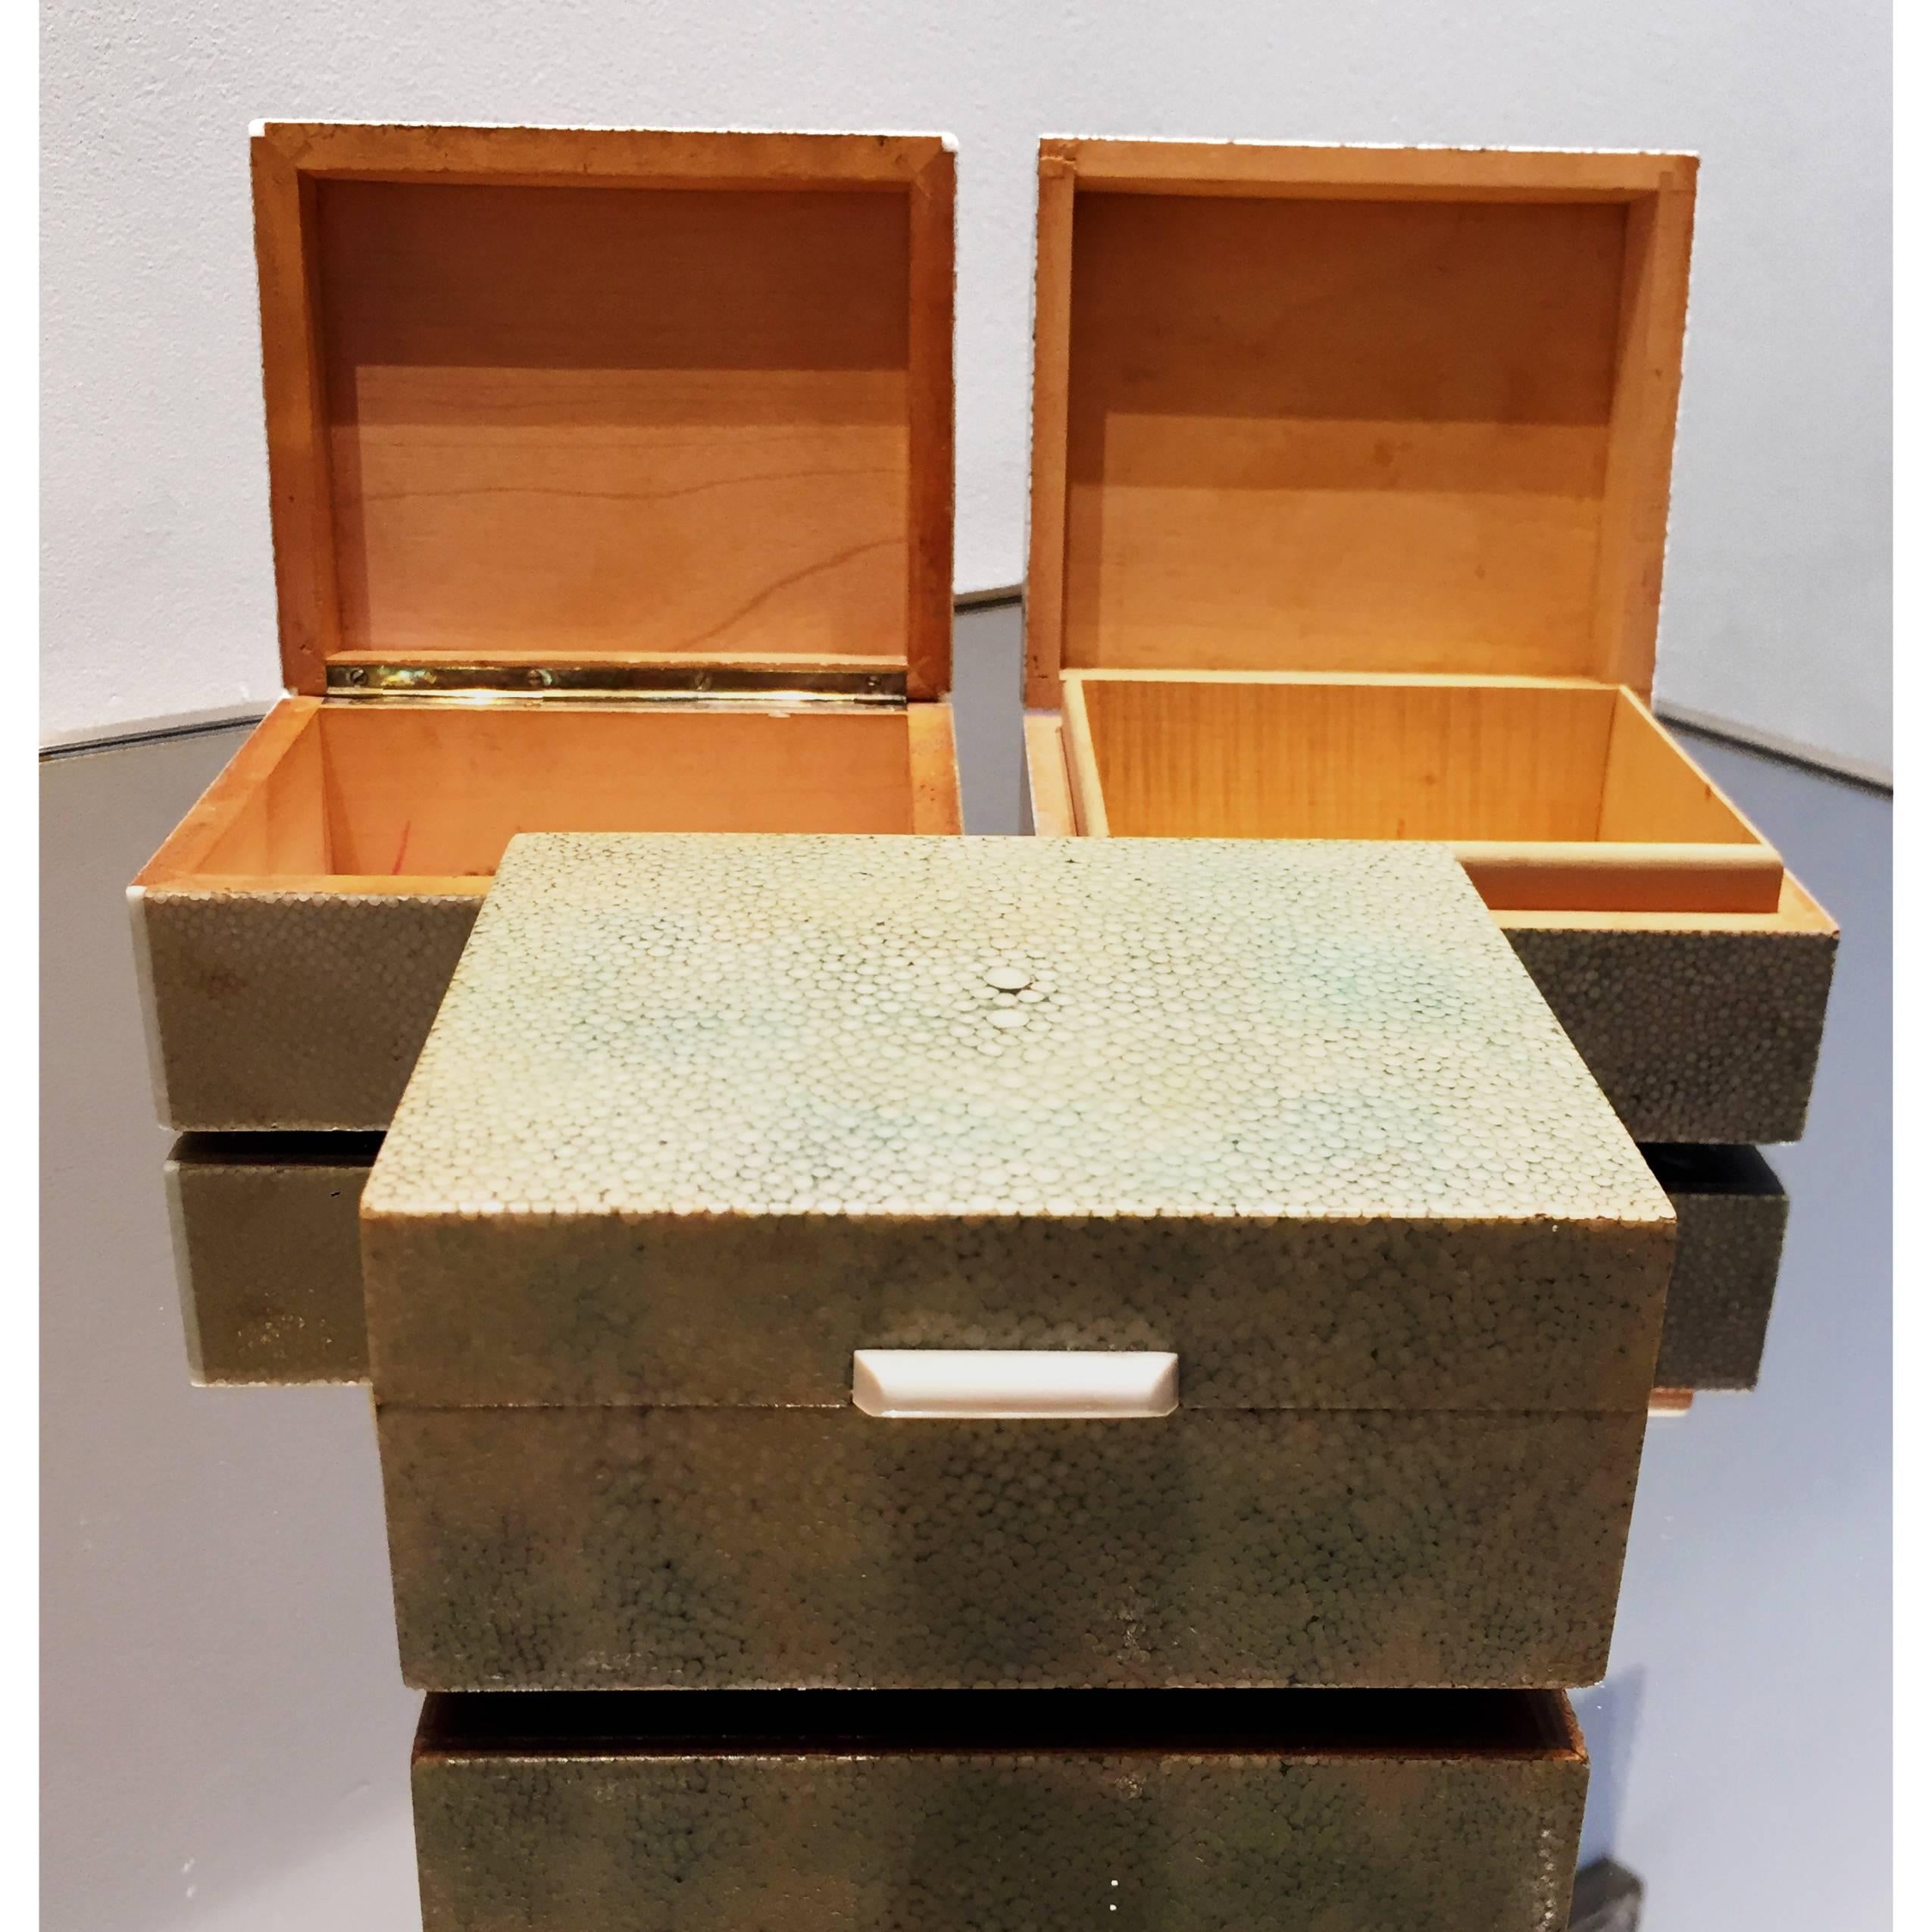 1920s Art - Deco shagreen trinket boxes. Highly collectable, in three beautiful neutral colors. Perfect vintage condition.